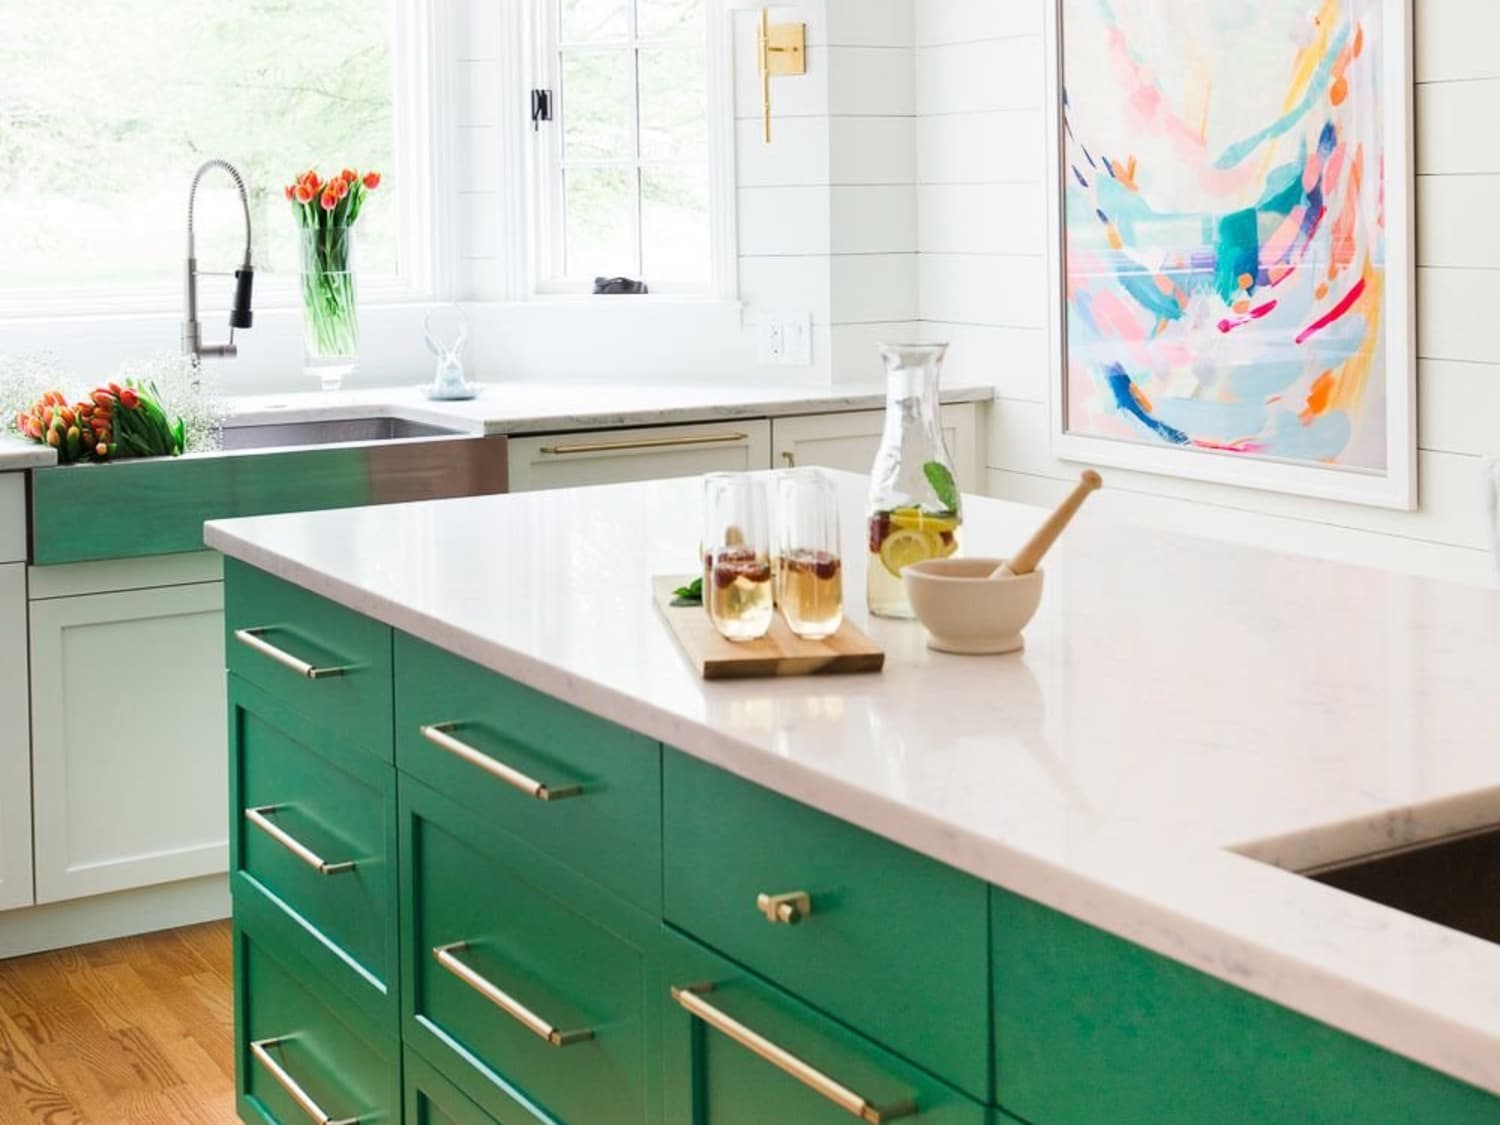 15 Kitchens With Bright Green Cabinets Kitchn